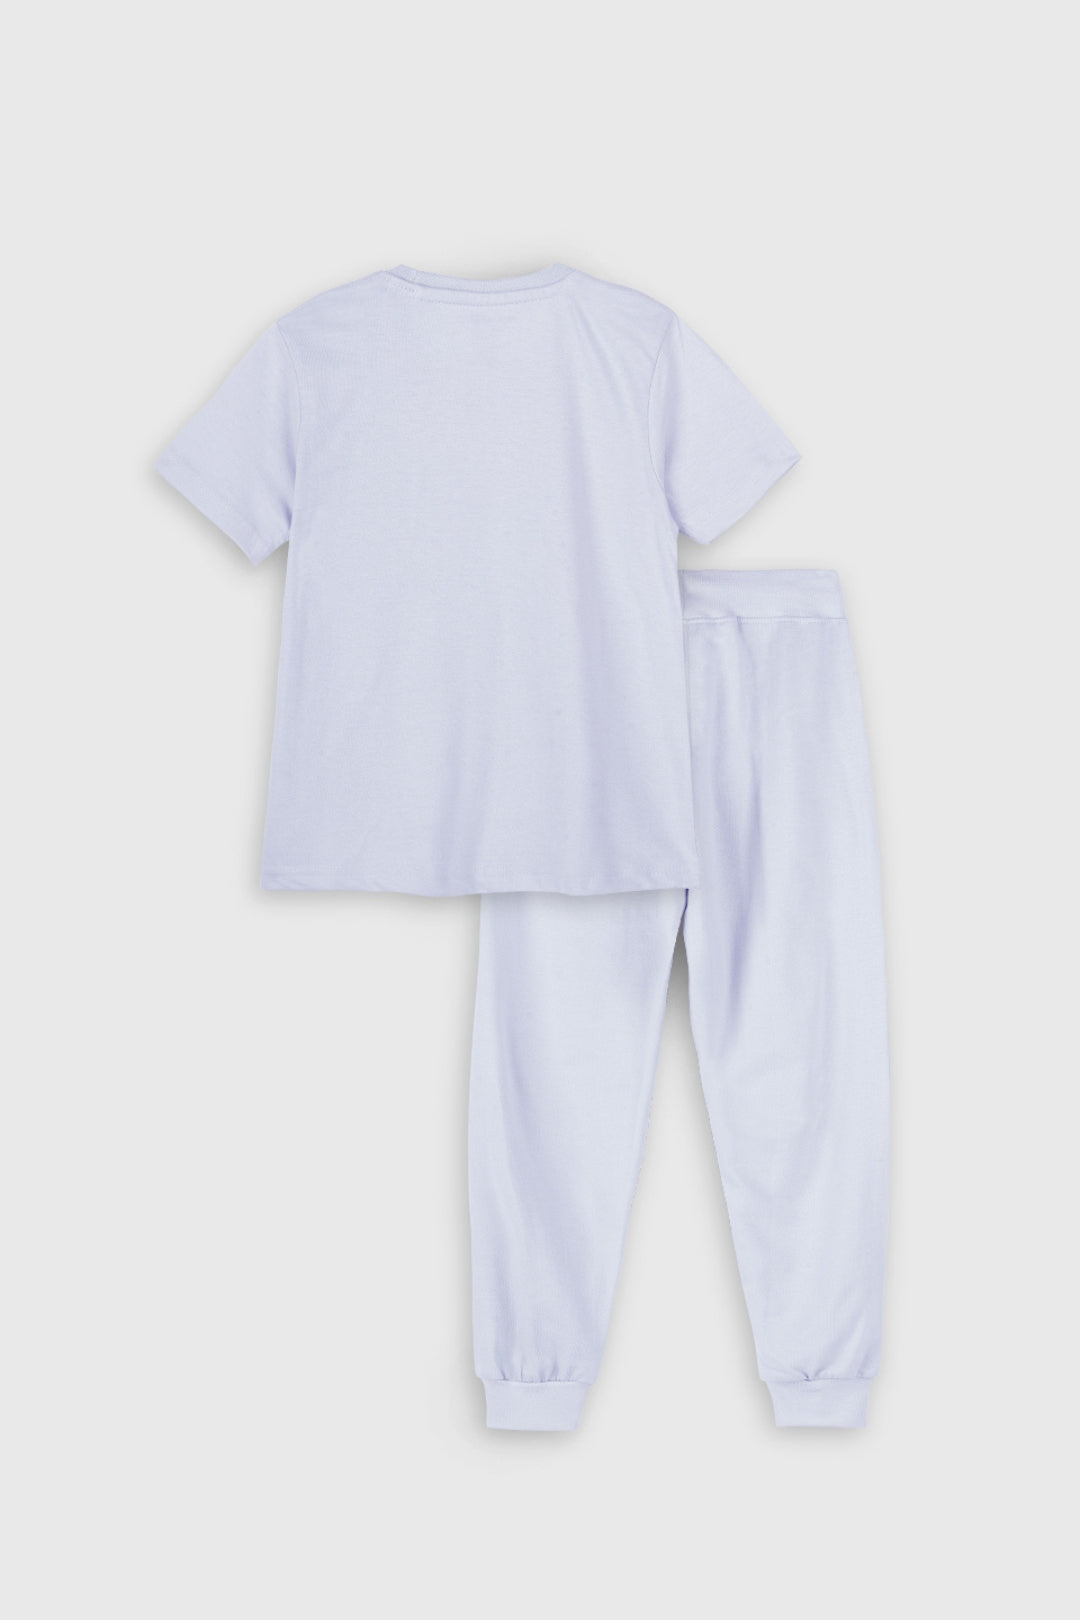 Tom & Jerry Blue Co-Ord Set for Family